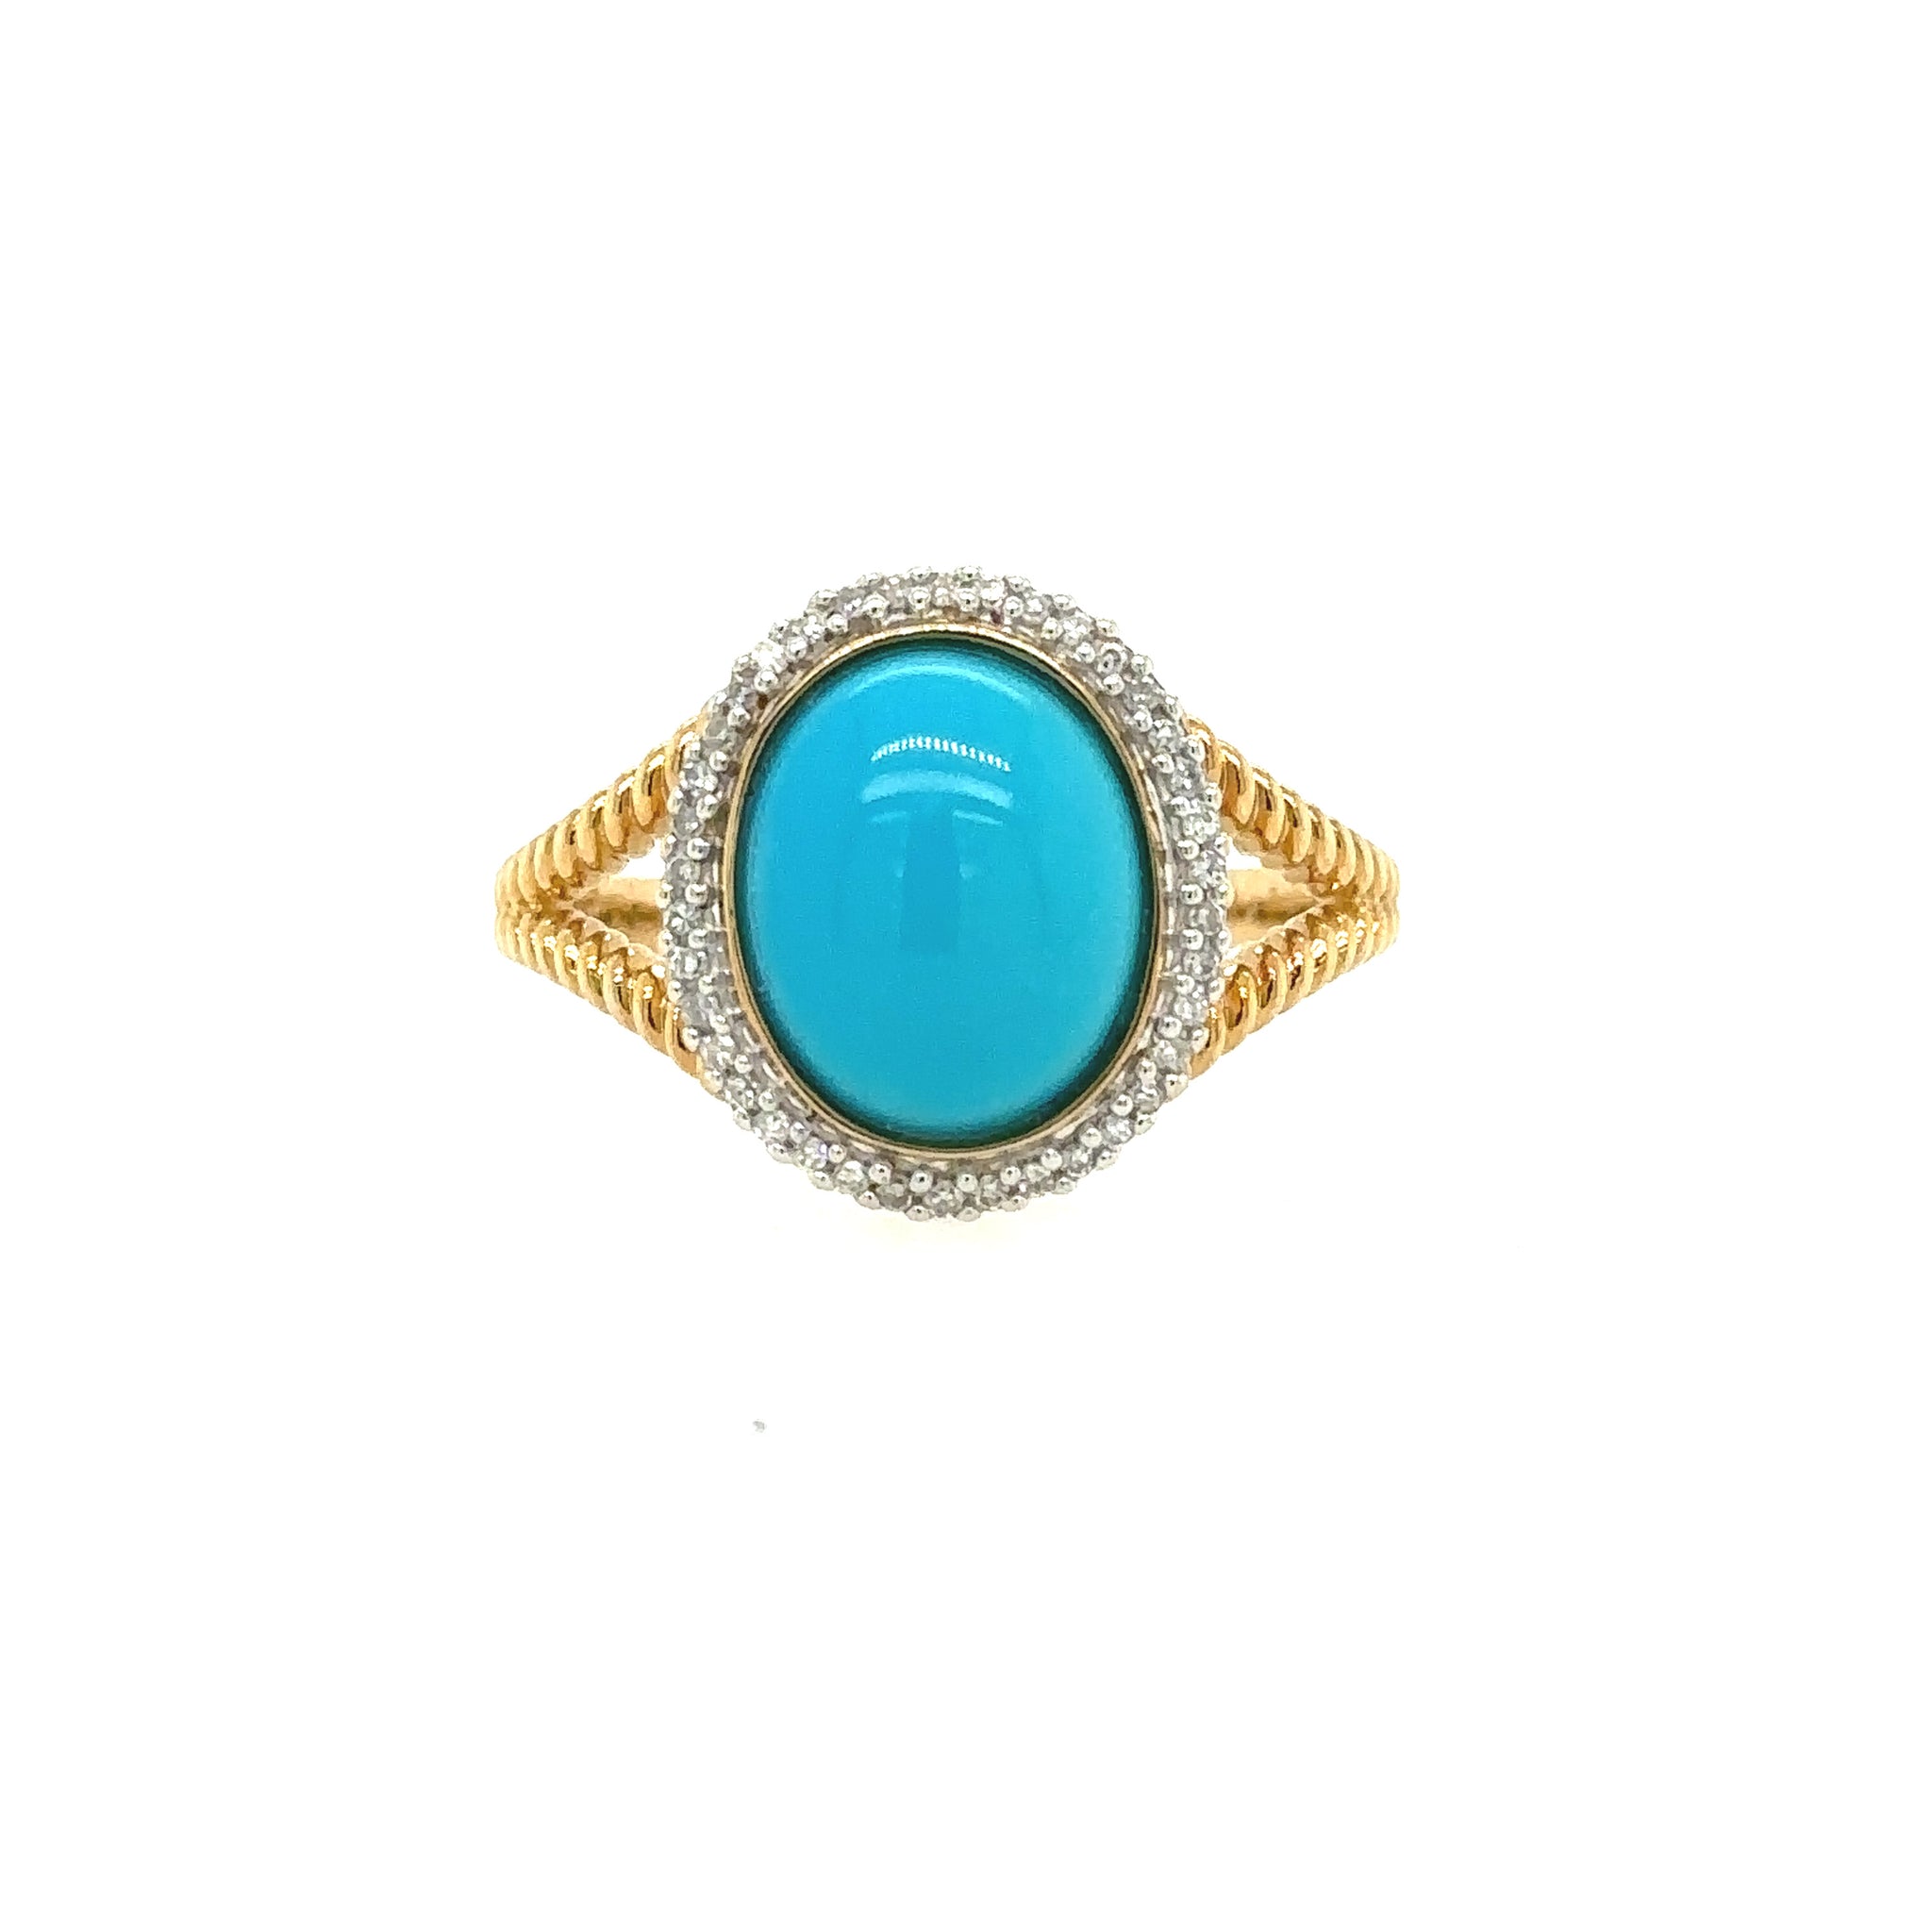 14K Solid Yellow Gold Oval Cabochon Turquoise and Diamond Cocktail Ring Size 9 1/4 US